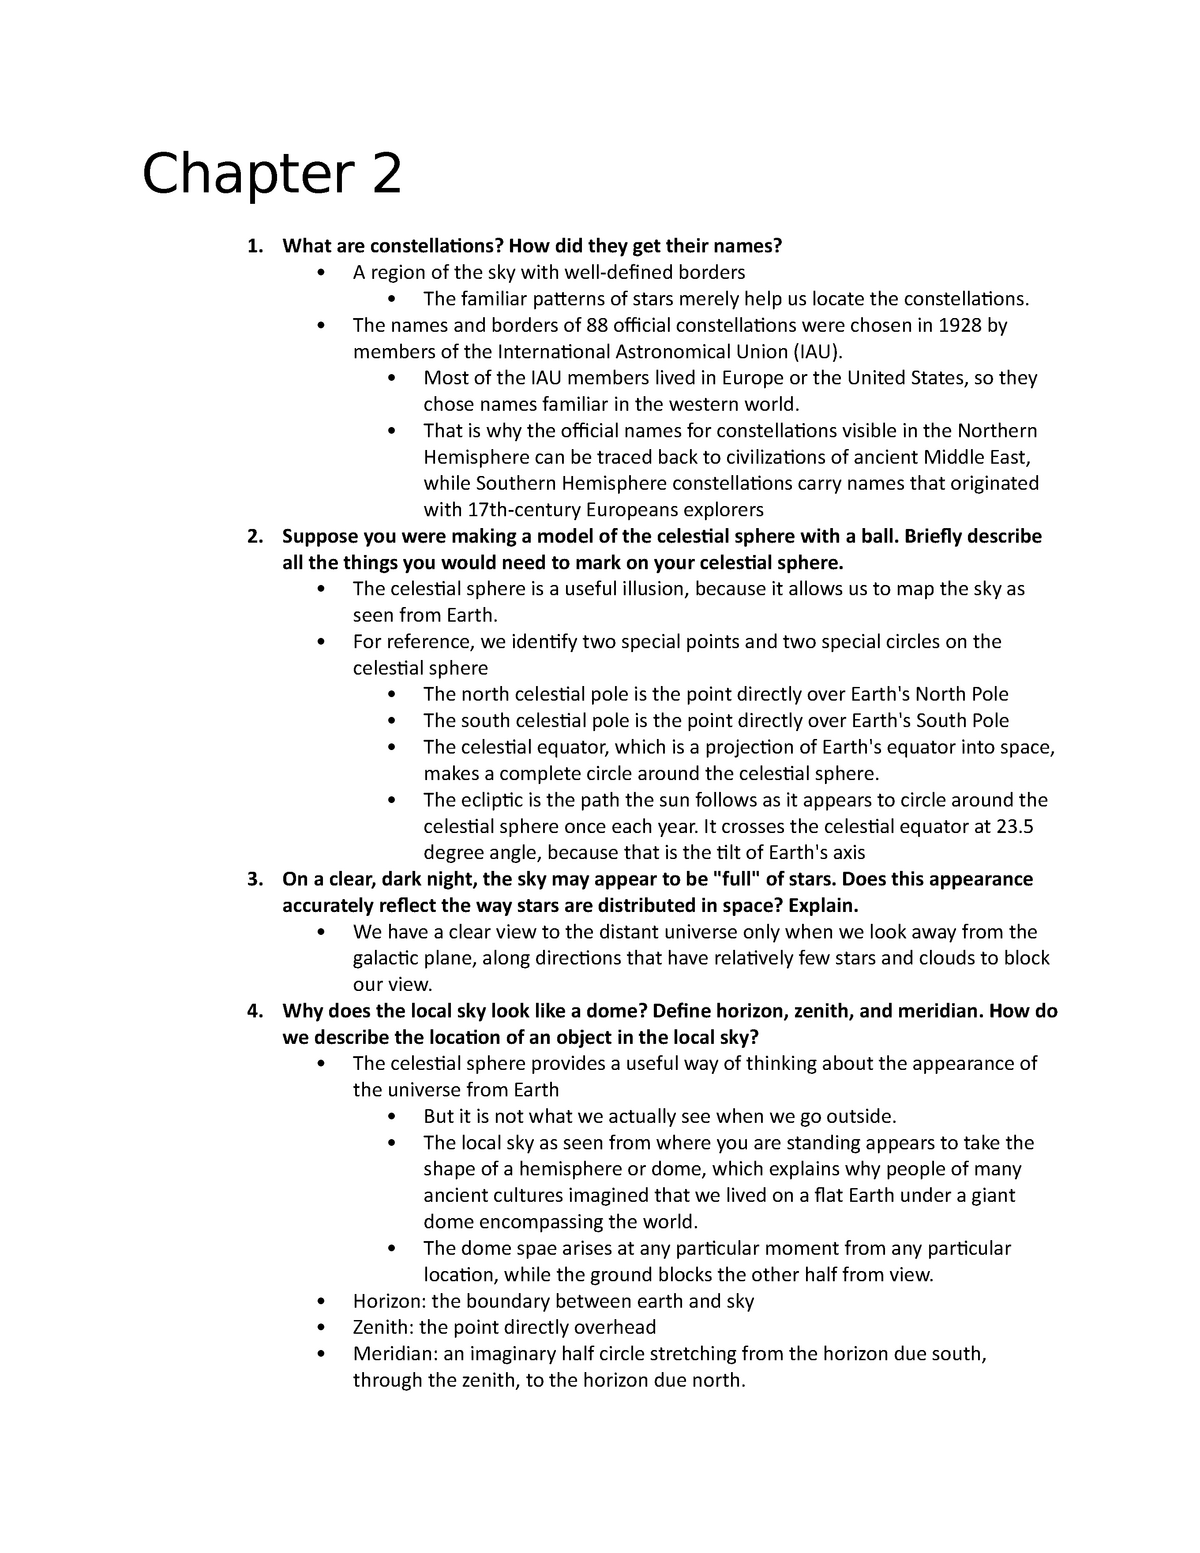 Chapter 2 Review - Chapter 2 1. What are constellations? How did they ...